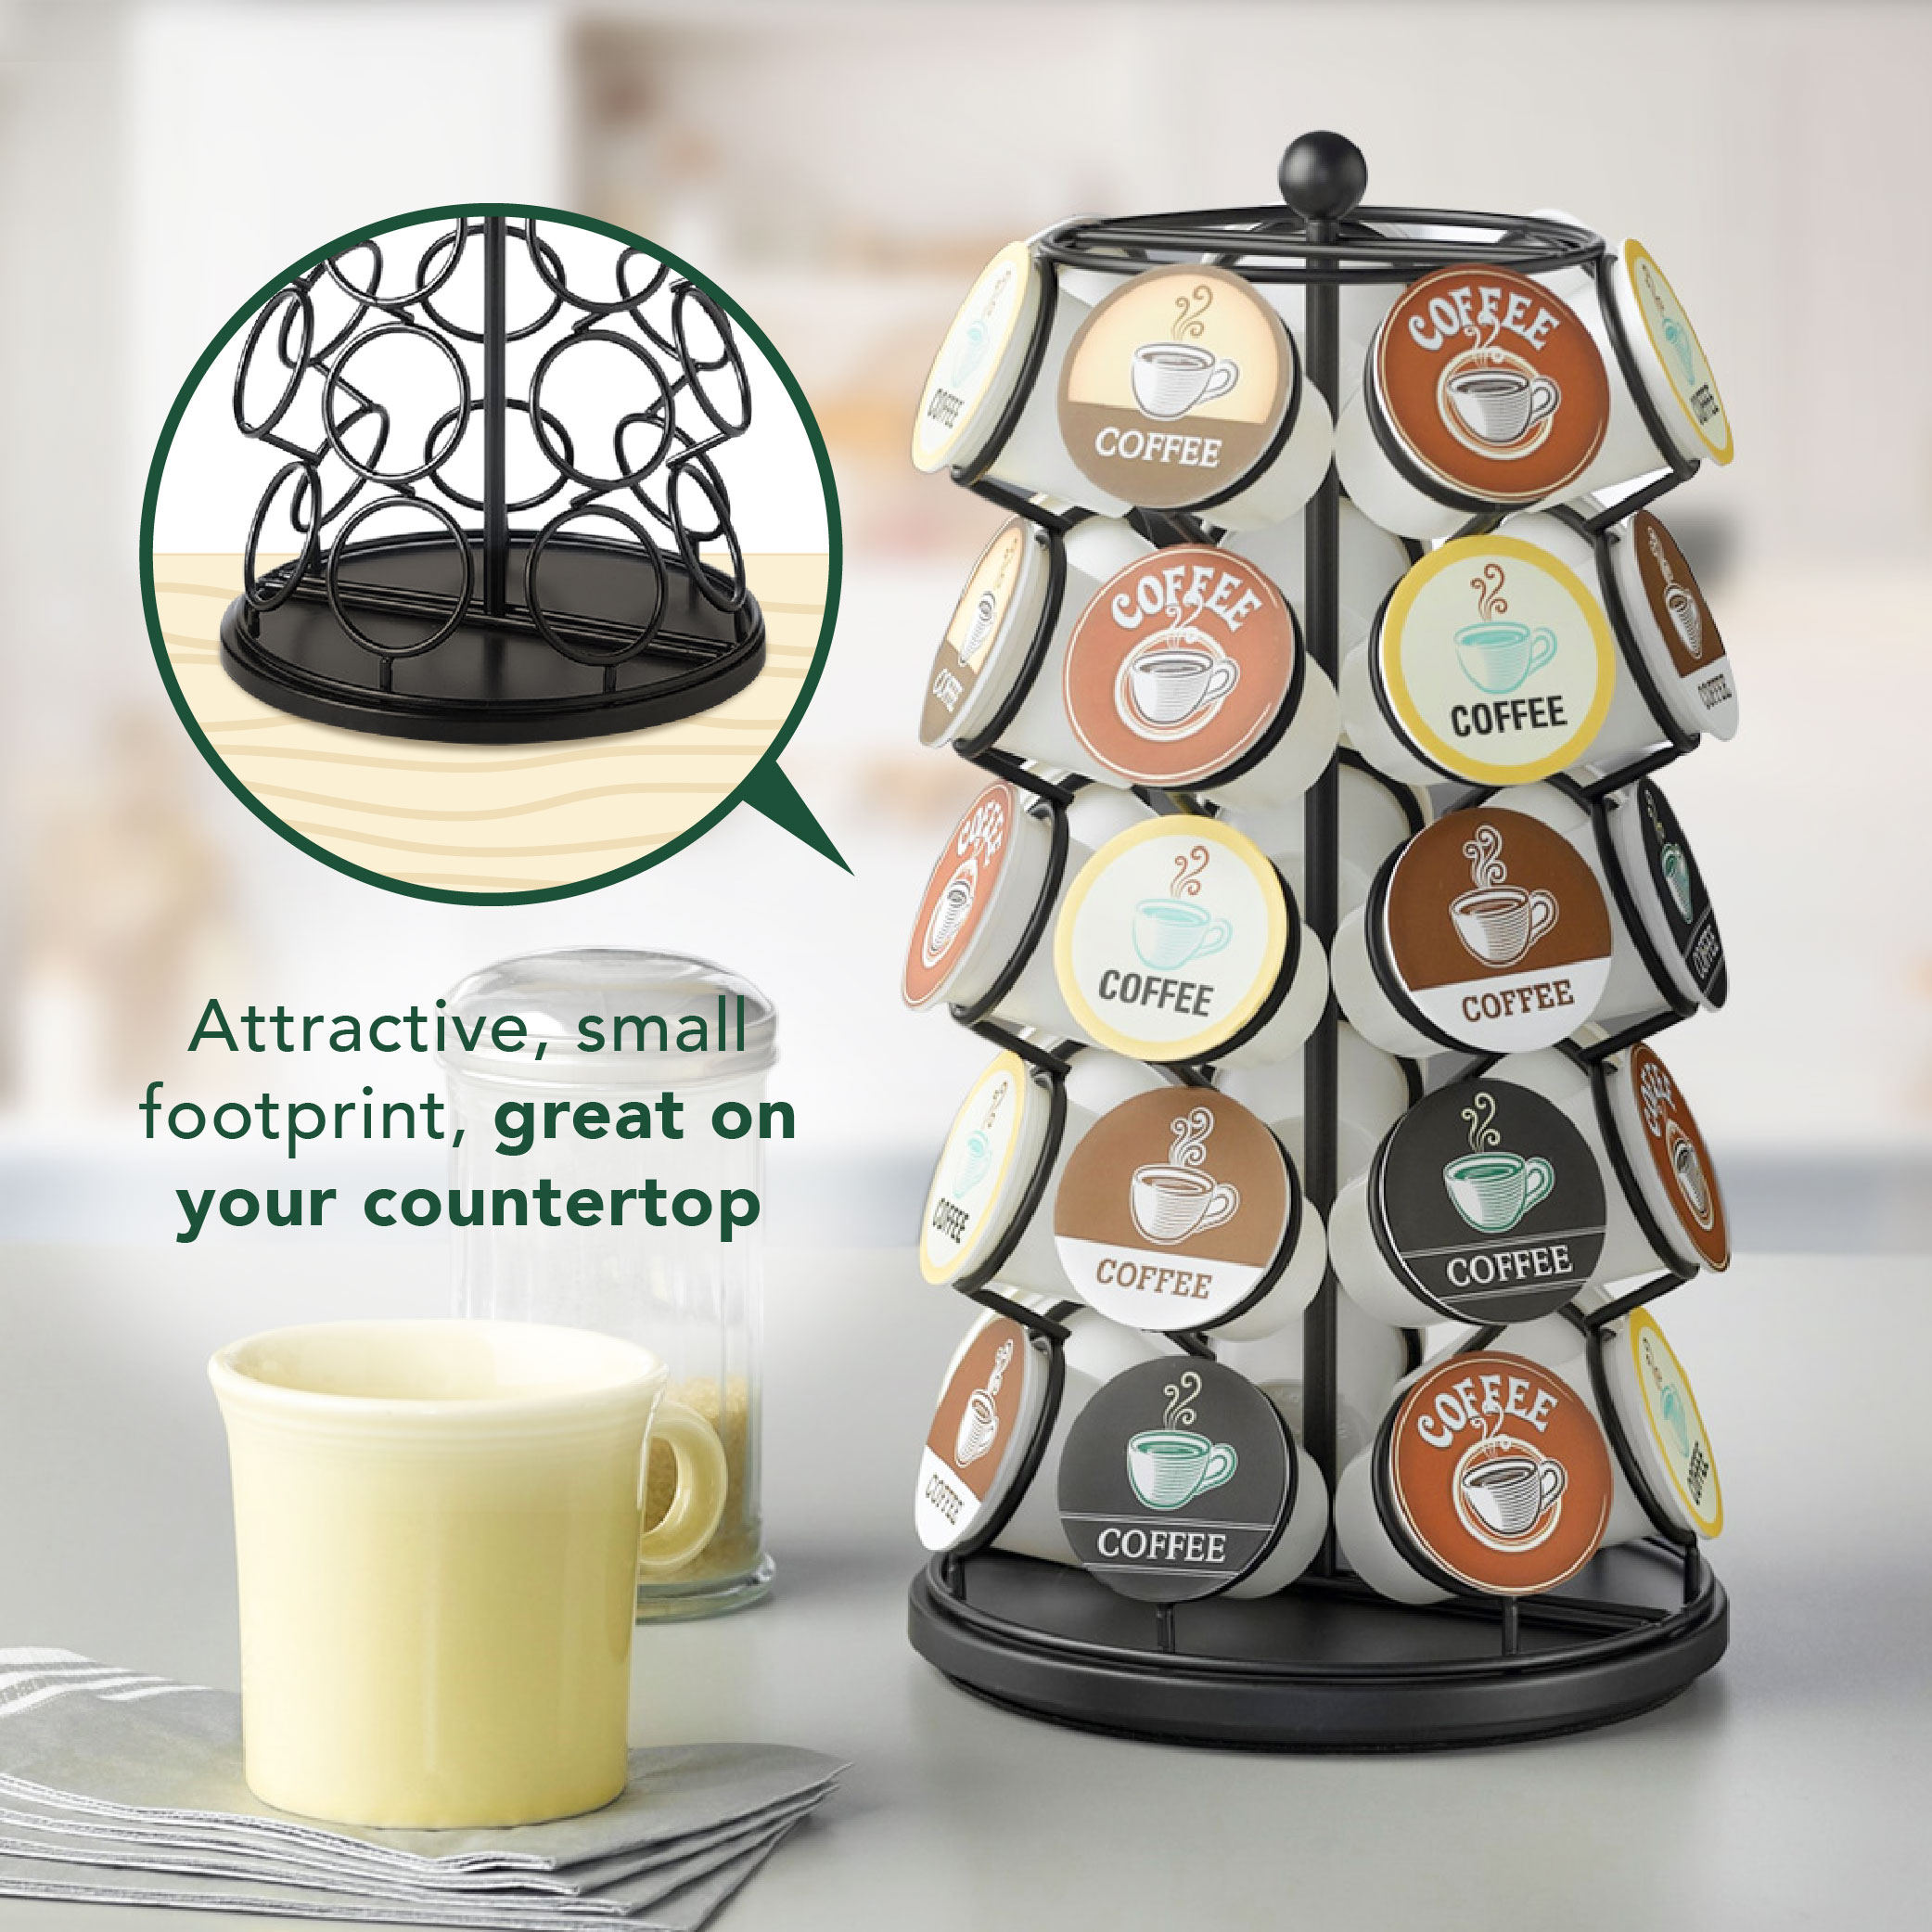 Nifty Solutions Coffee Pod Carousel – Compatible with K-Cups, 35 Pod Capacity, Black - image 5 of 9